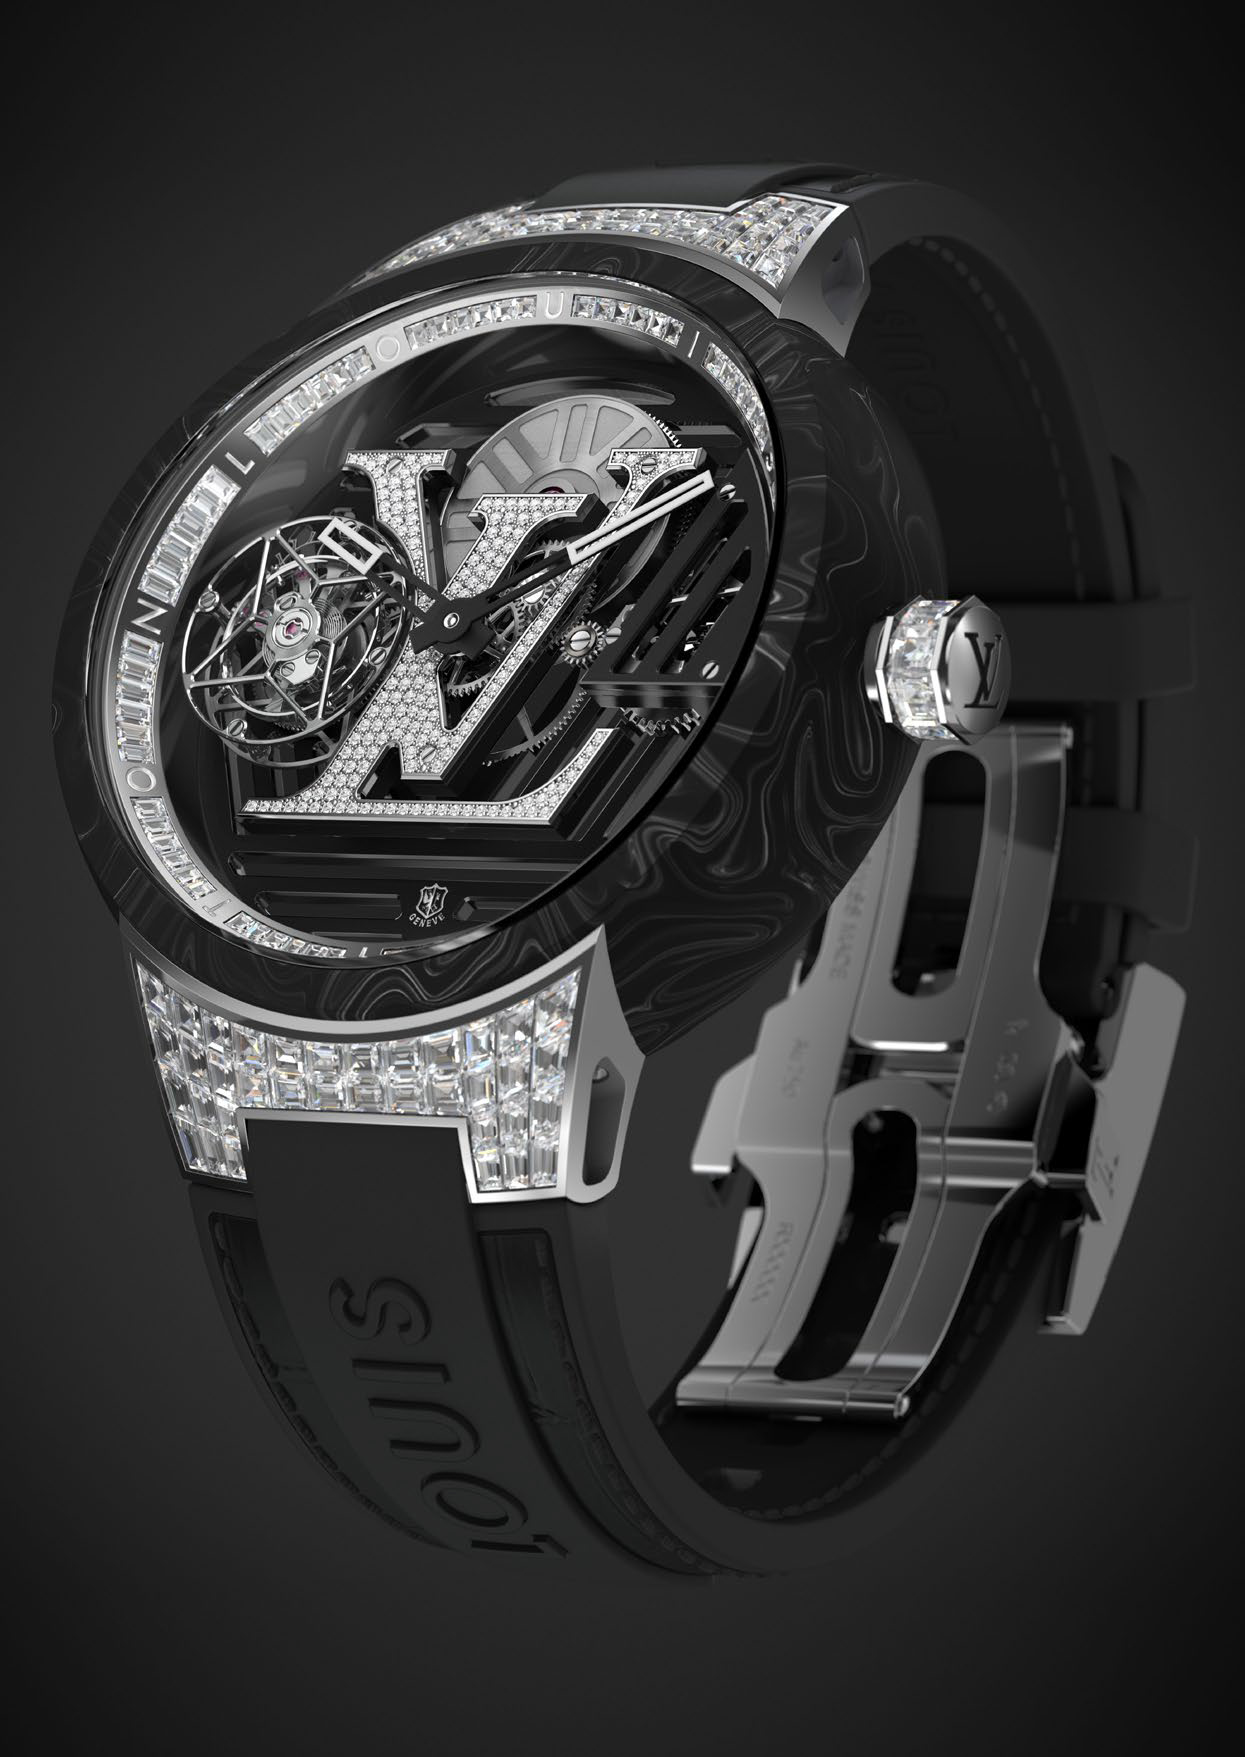 Louis Vuitton Uses Advanced Materials And Watchmaking Skills In